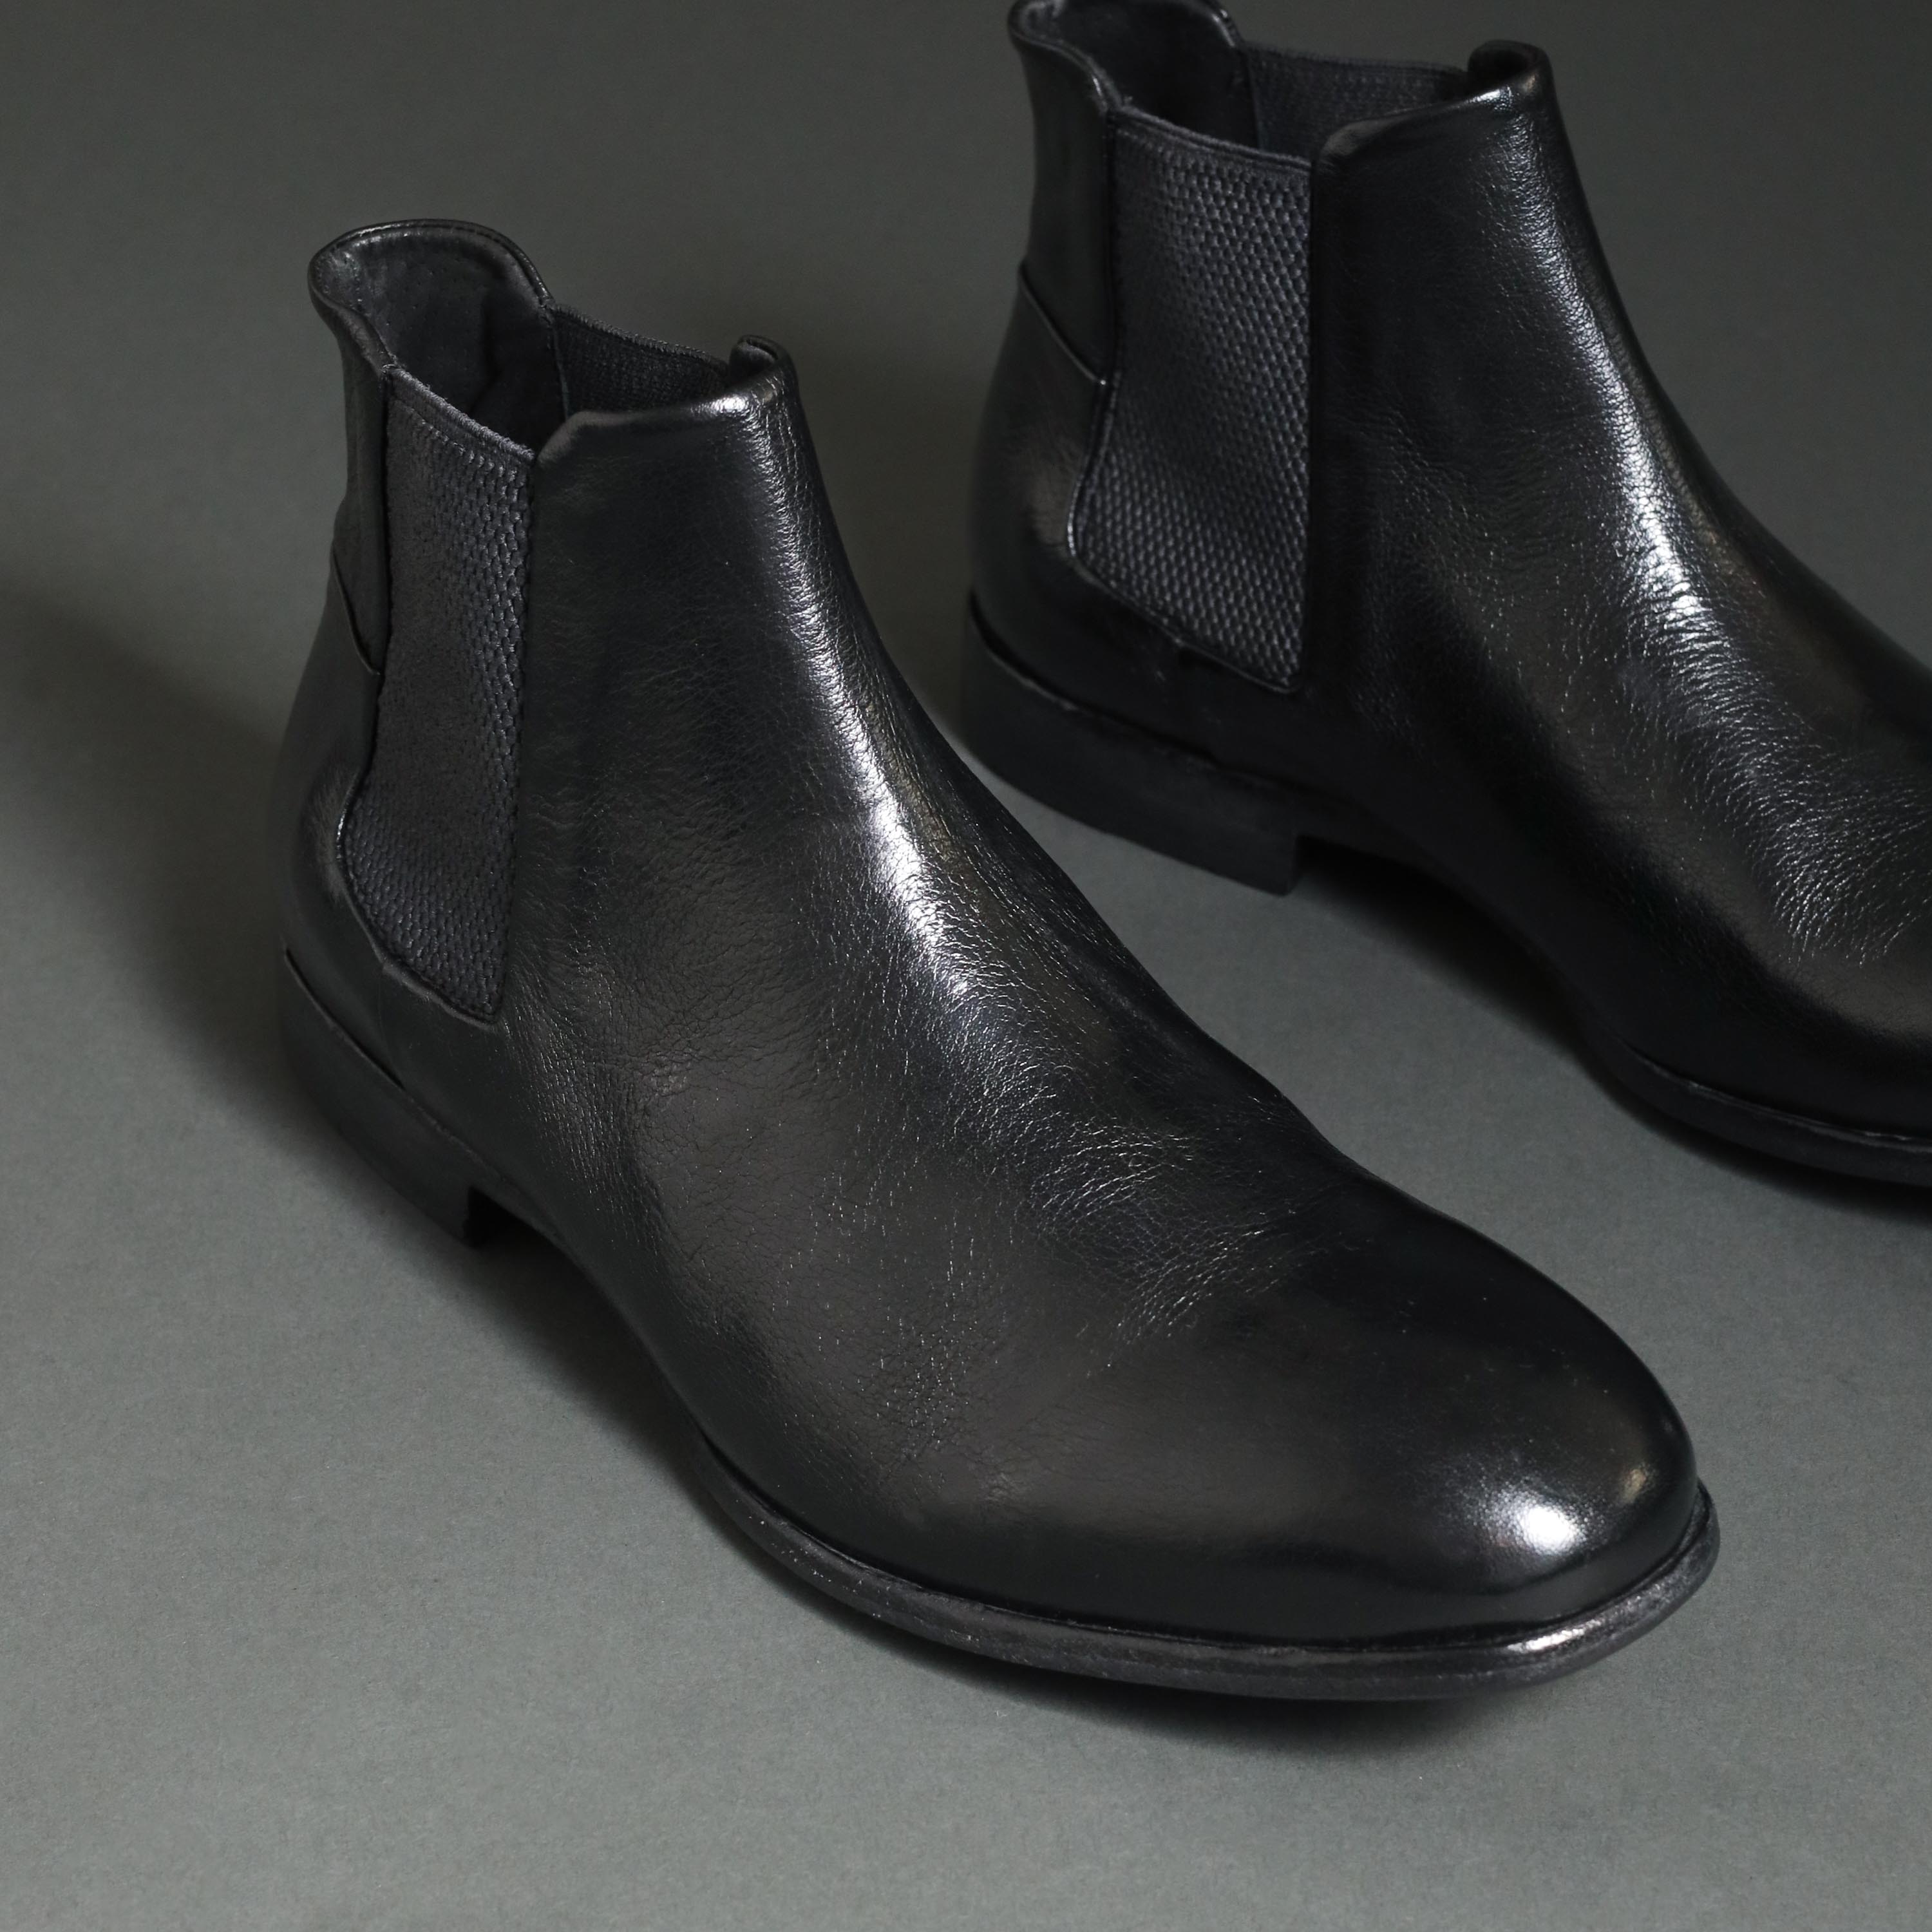 Conflict For Interest Chelsea Boot Conflict For Interest Livorno Black